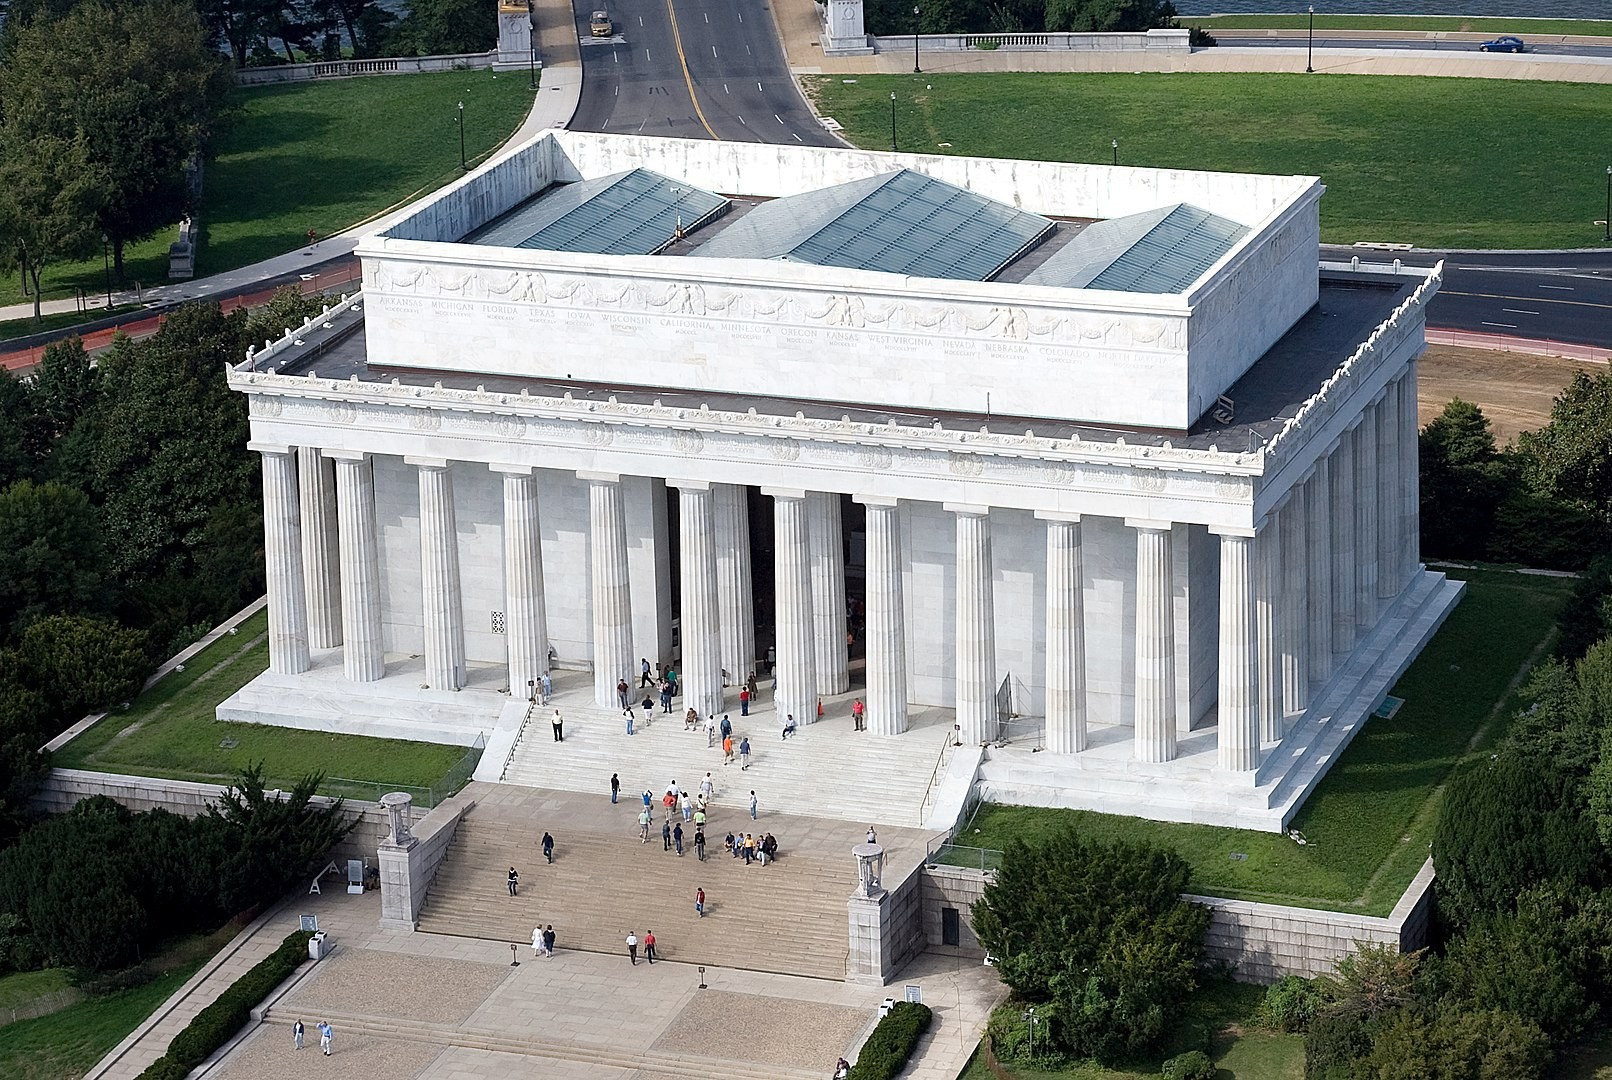 By Aerial_view_of_Lincoln_Memorial_-_east_side.jpg: Carol M. Highsmithderivative work: upstateNYer - Aerial_view_of_Lincoln_Memorial_-_east_side.jpg, Public Domain, https://commons.wikimedia.org/w/index.php?curid=10346671